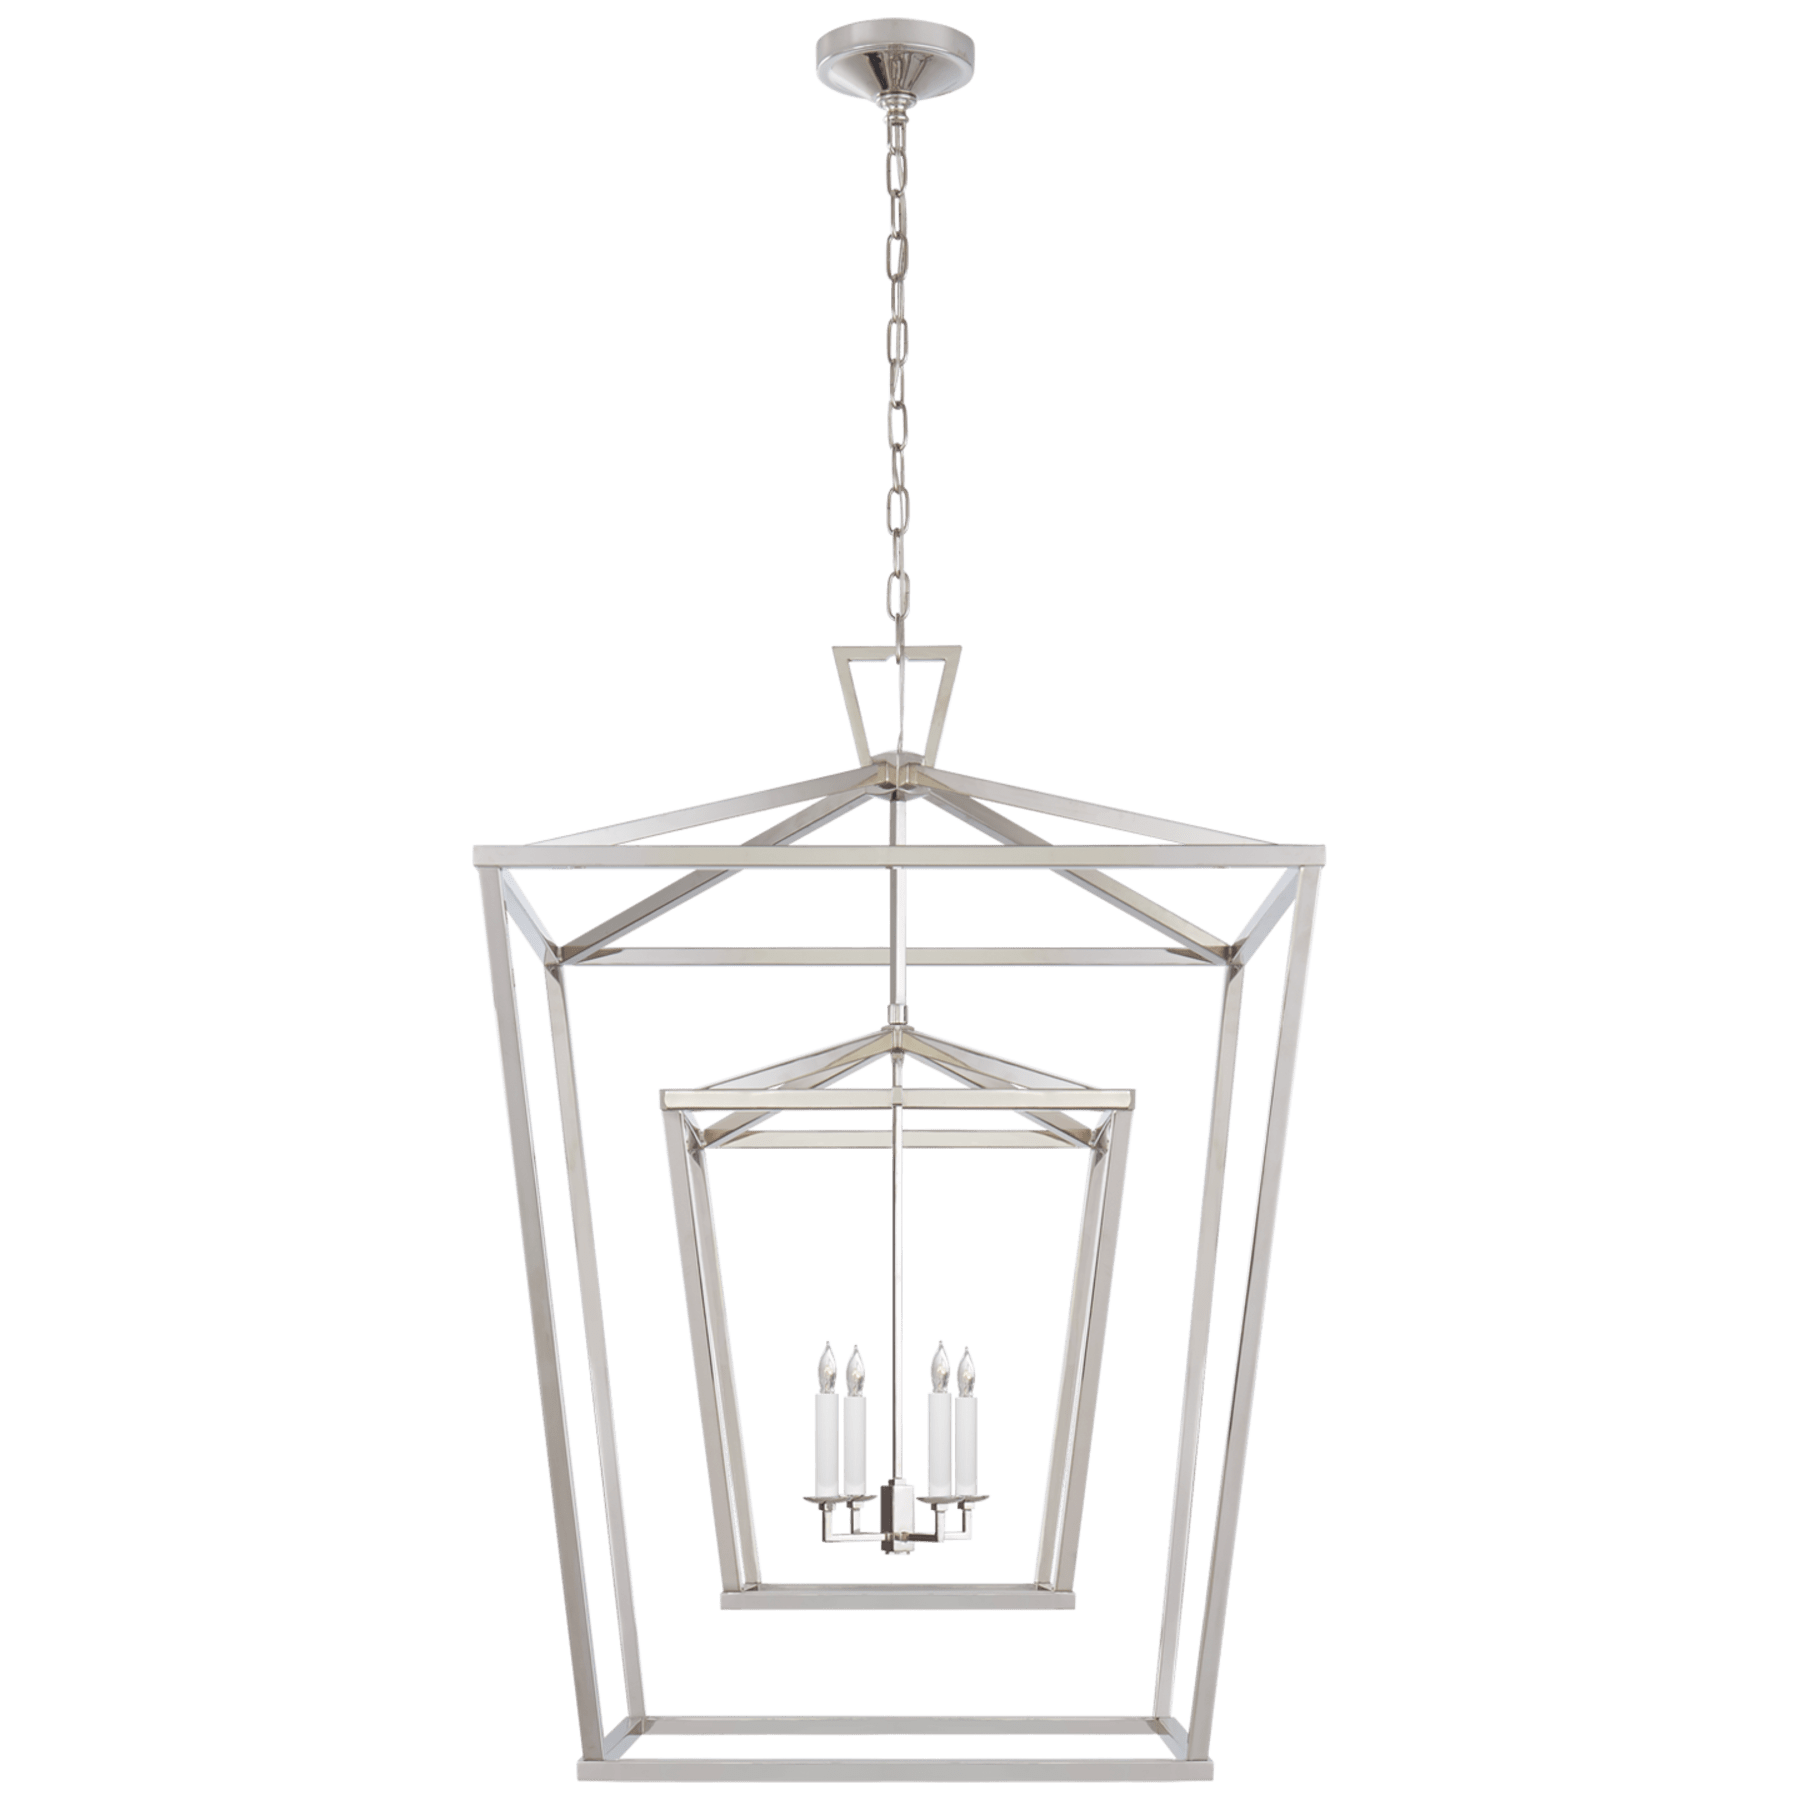 Visual Comfort Darlana Extra Large Double Cage Lantern